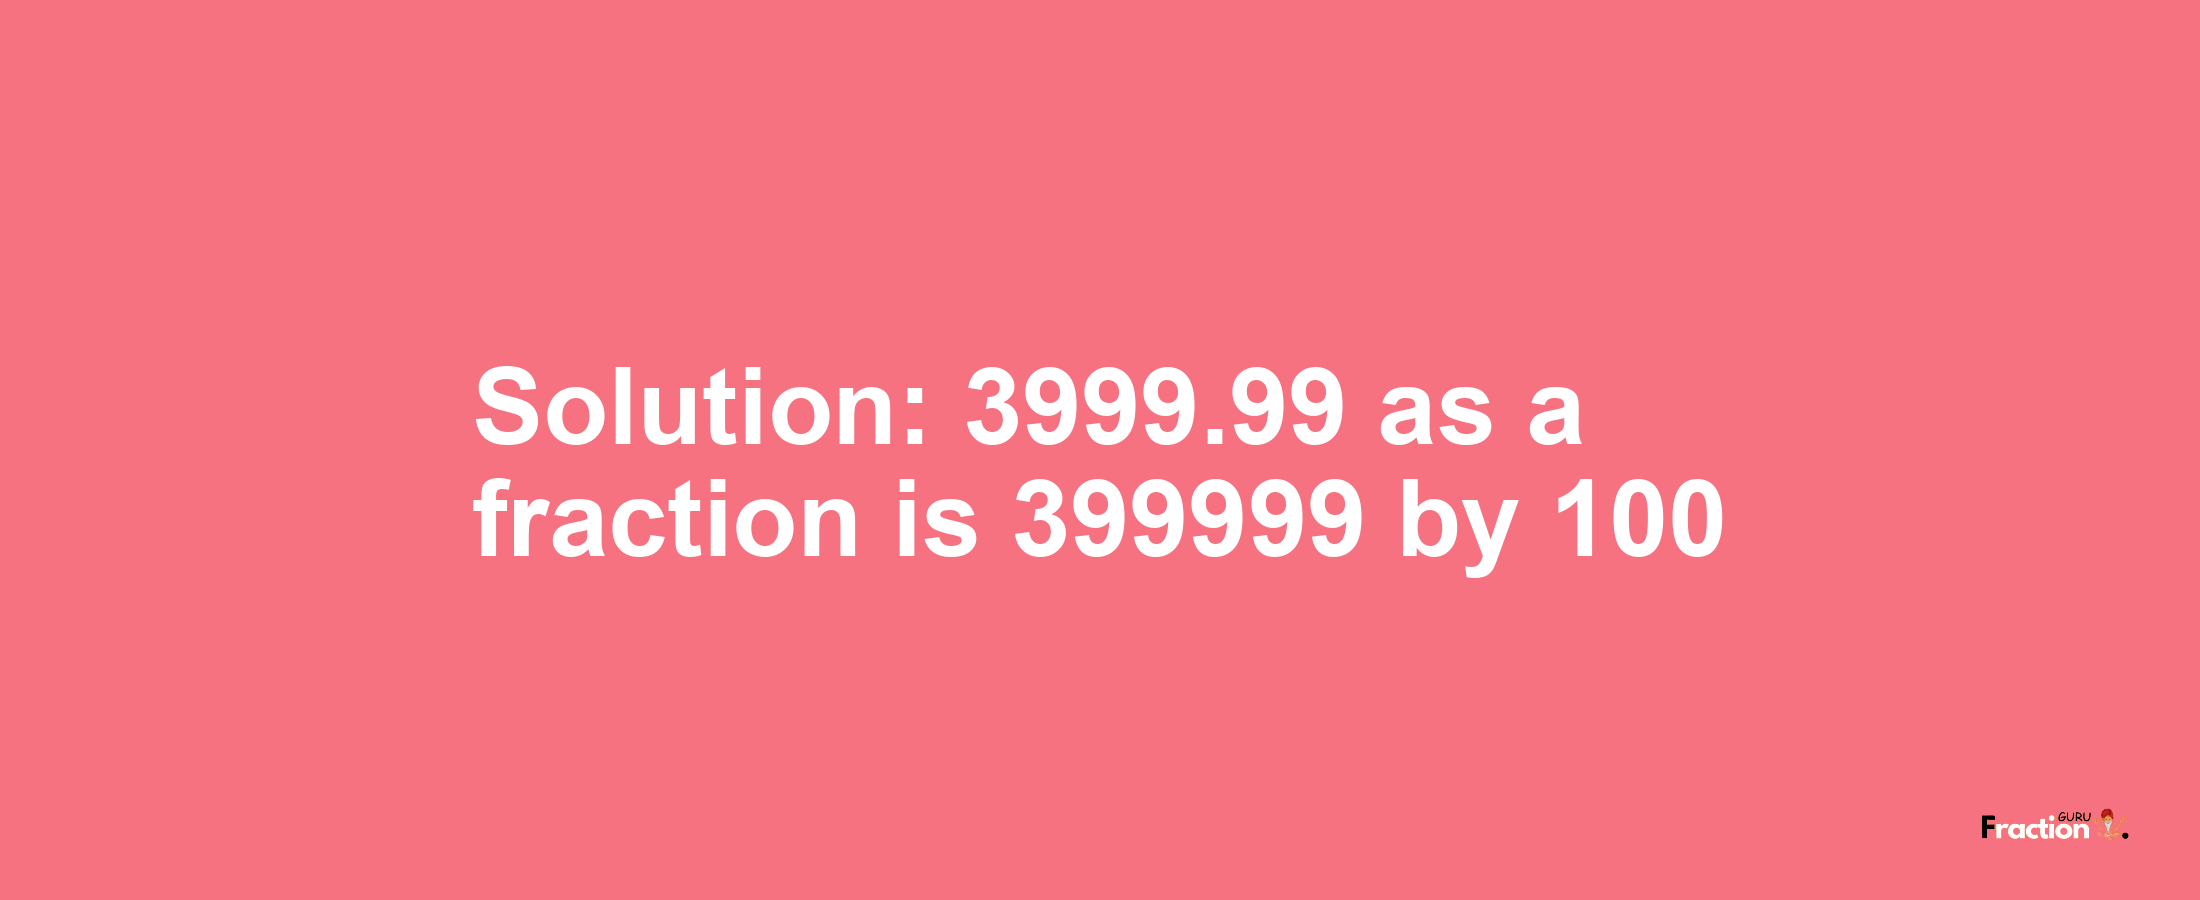 Solution:3999.99 as a fraction is 399999/100